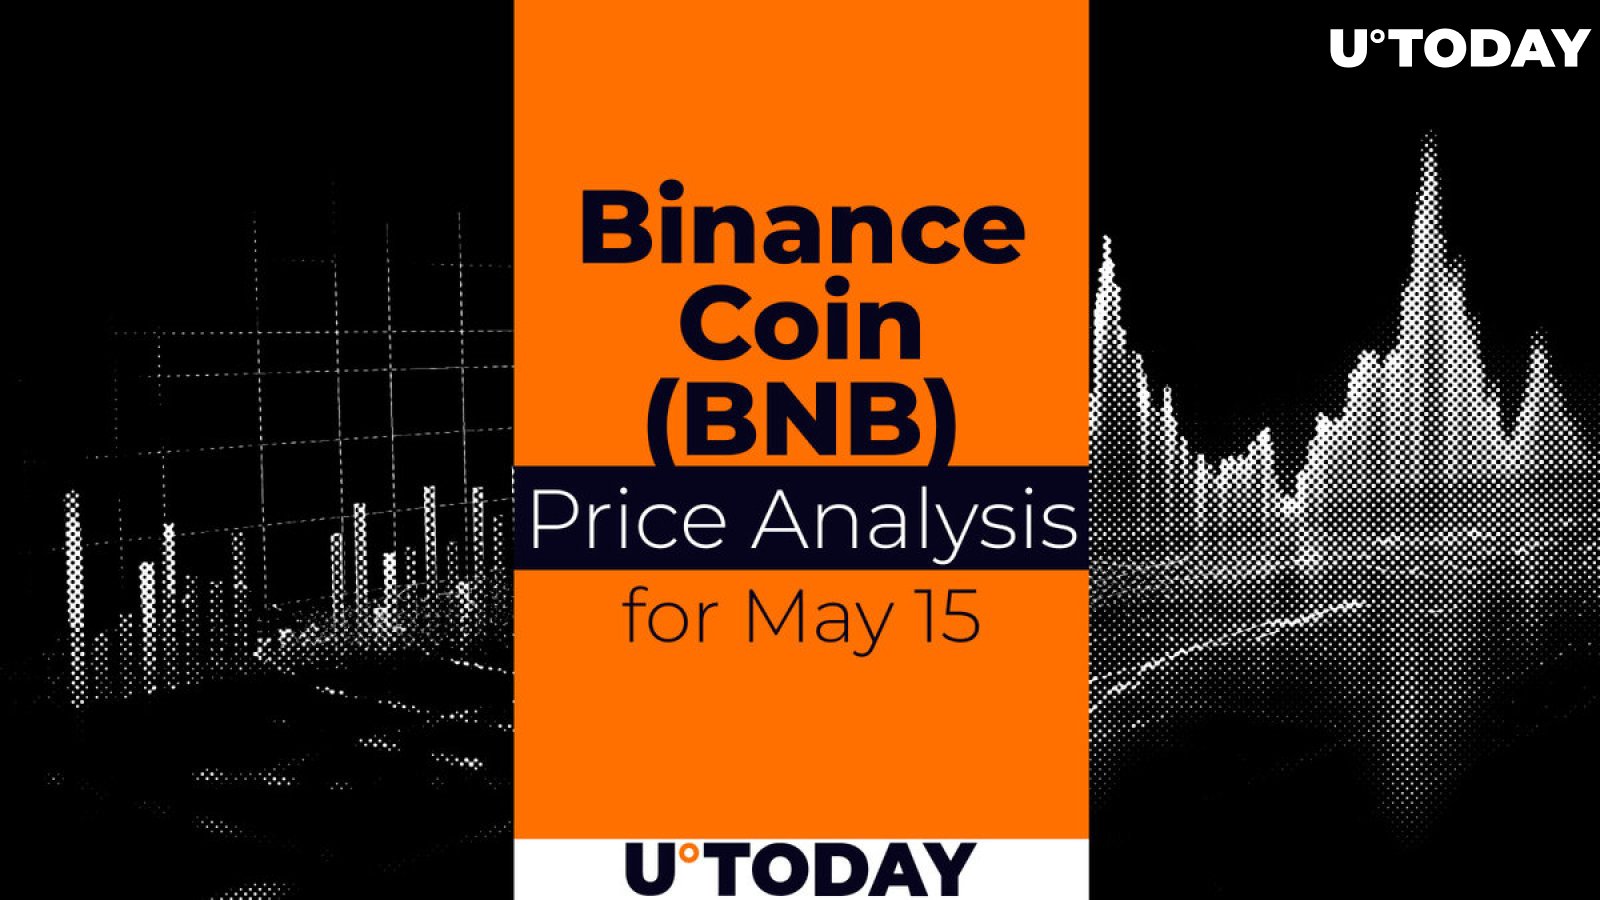 Binance Coin (BNB) Price Prediction for May 15